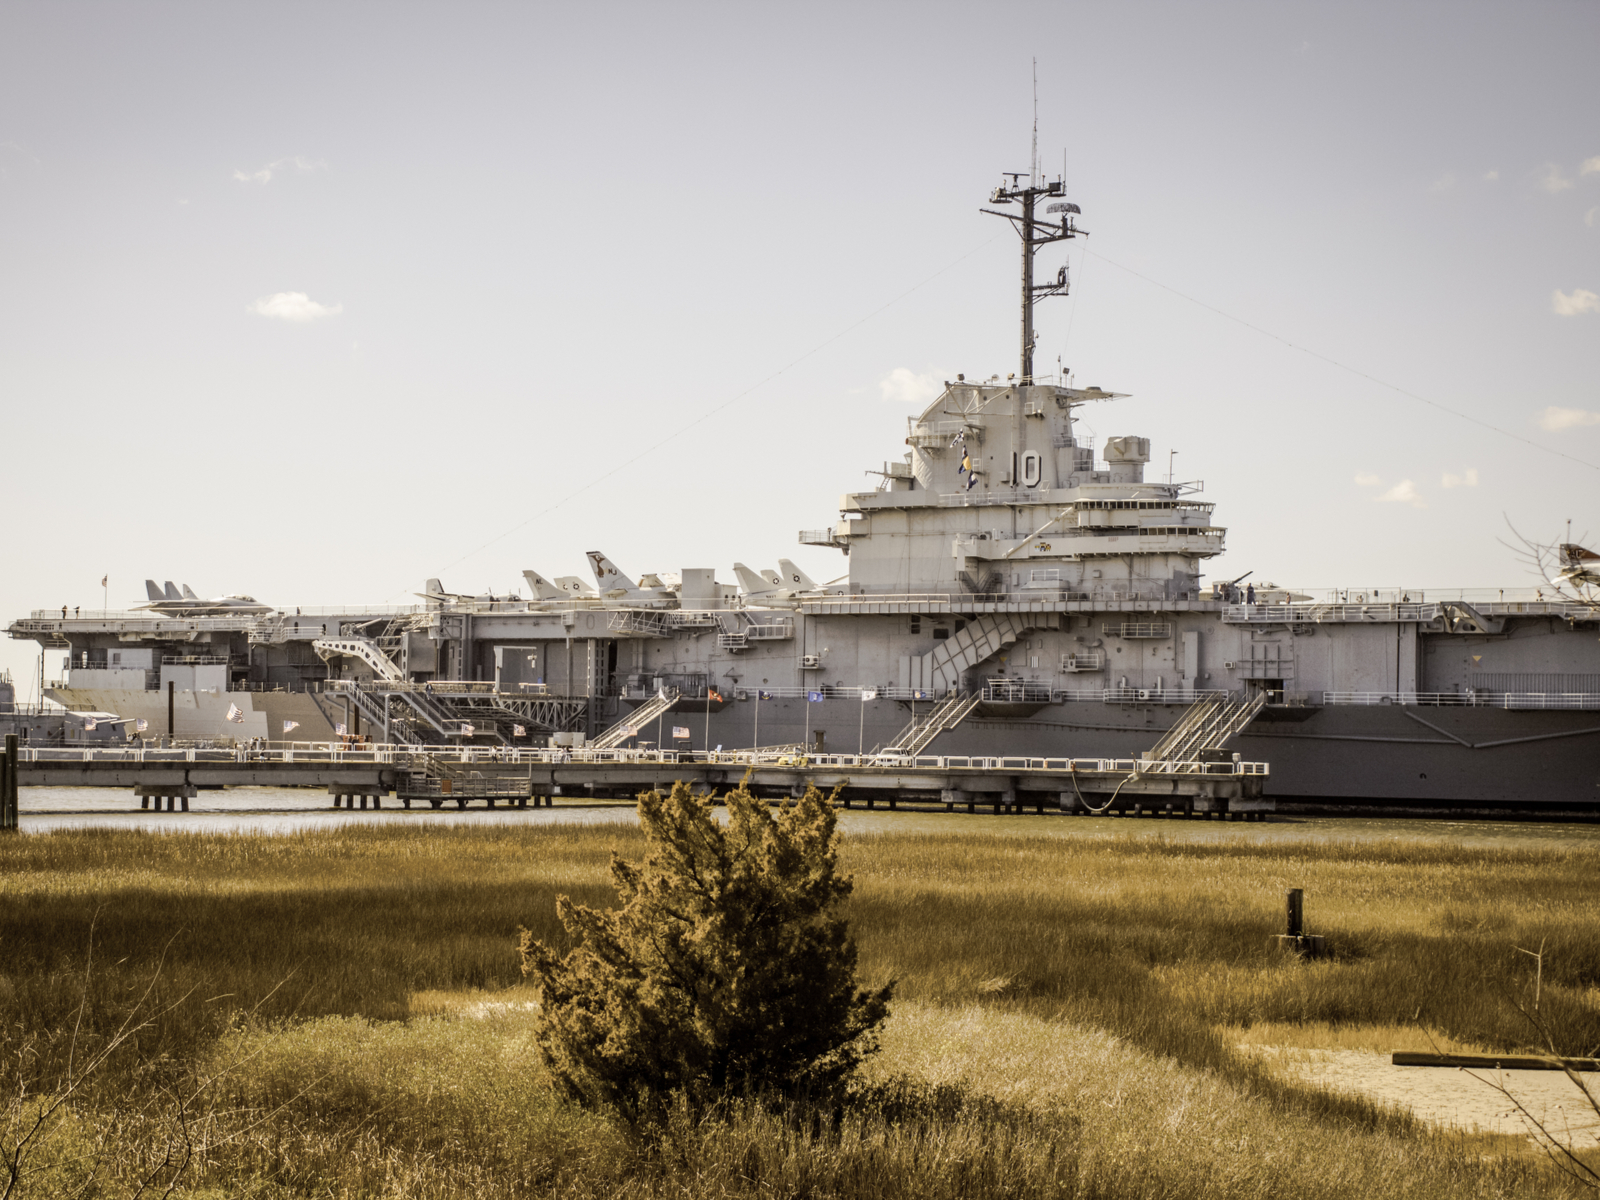 Patriots Point naval museum in Charleston, one of the best sights there